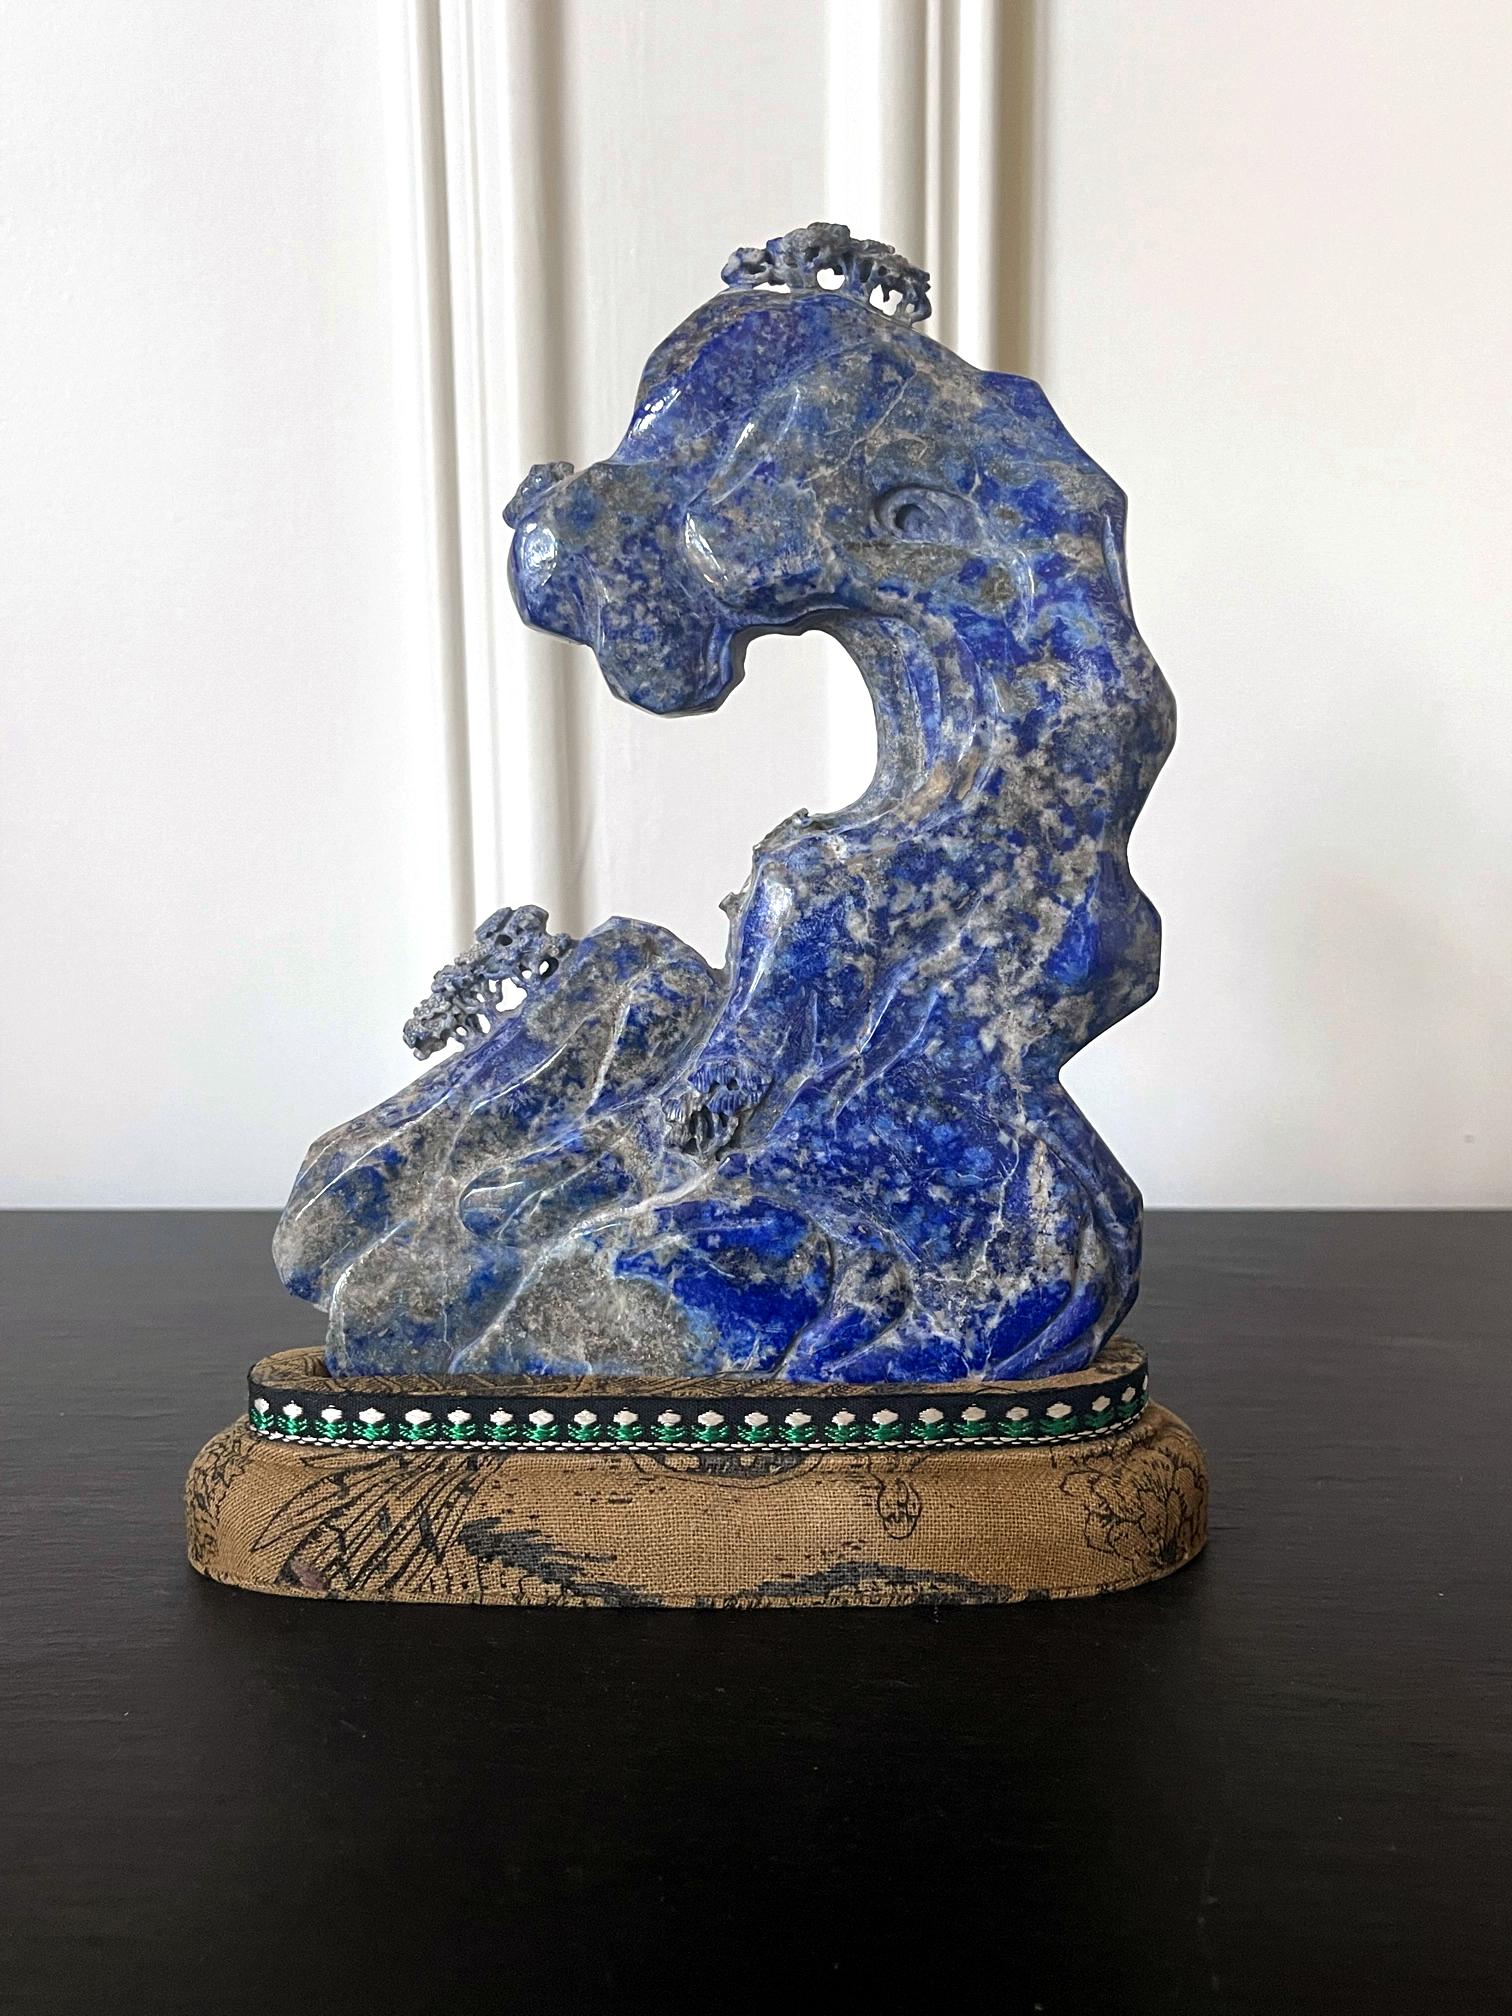 A Chinese scholar rock carved from a natural lapis stone and displayed on a brocade wrapped stand circa late 19th century Qing Dynasty. The brightly blue lapis was considered as am exotic gemstone in China and mostly imported from Persia through the